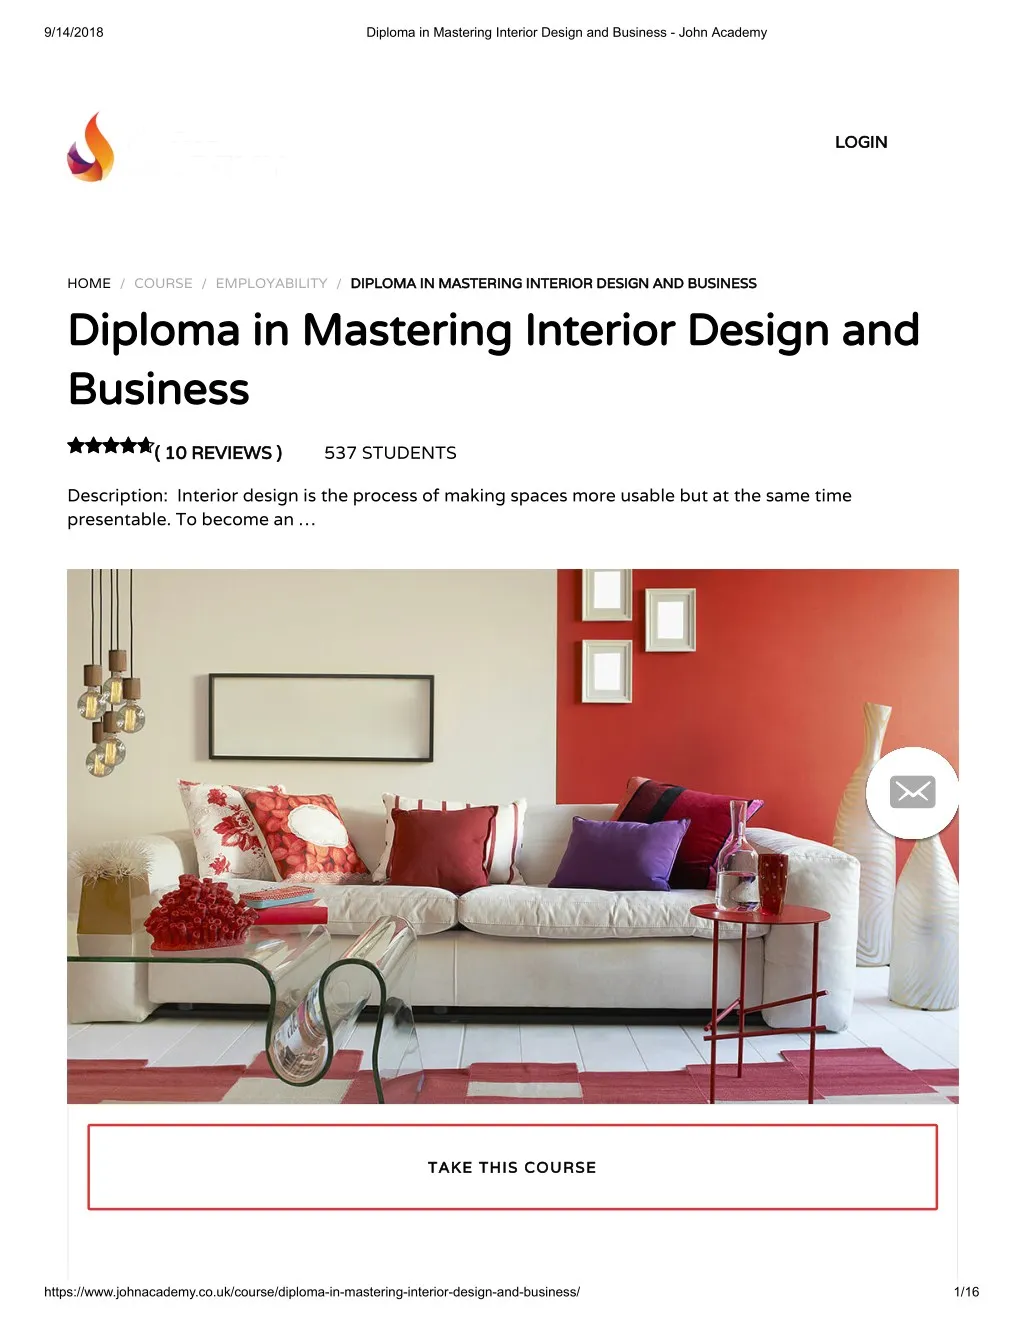 Ppt Diploma In Mastering Interior Design And Business